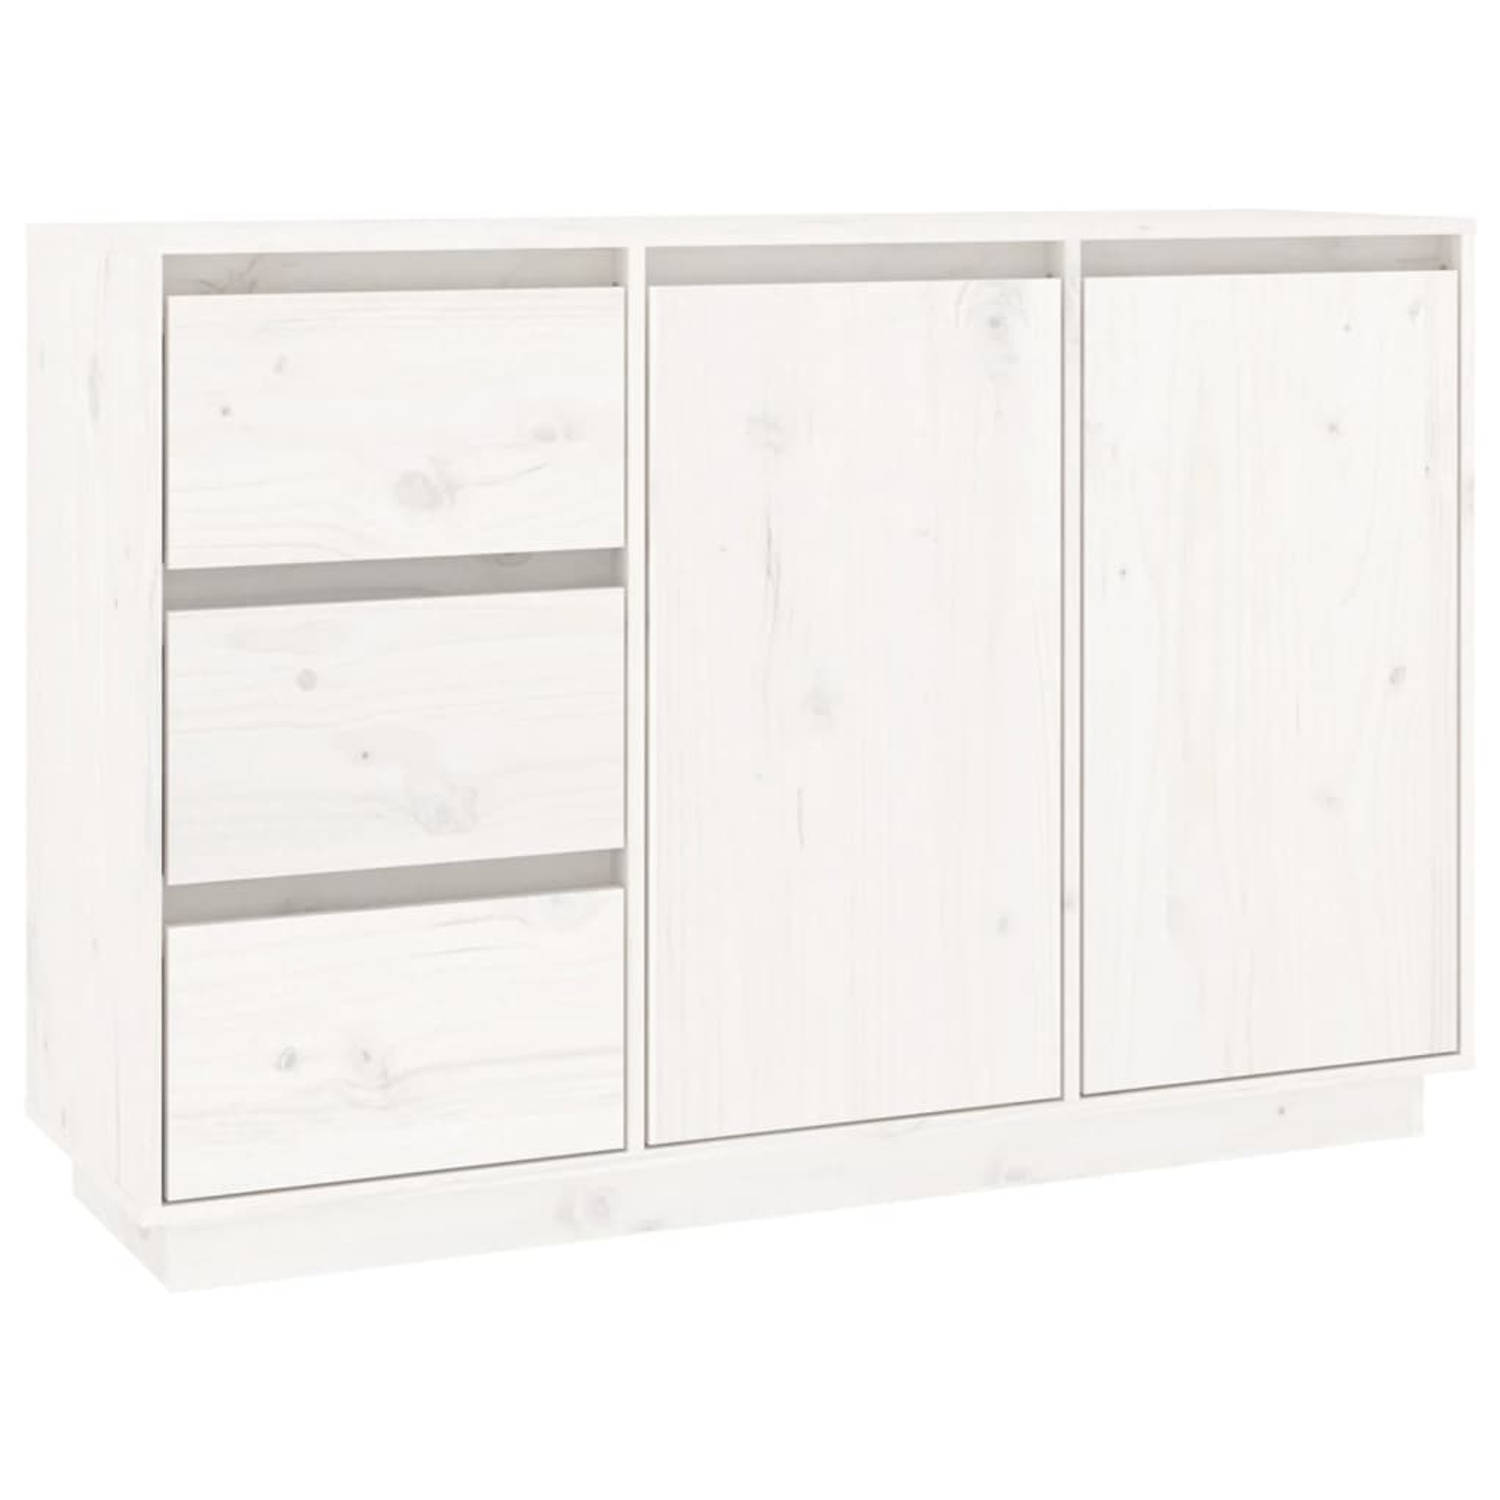 The Living Store Wandkast - Grenenhout - 111 x 34 x 75 cm - Wit